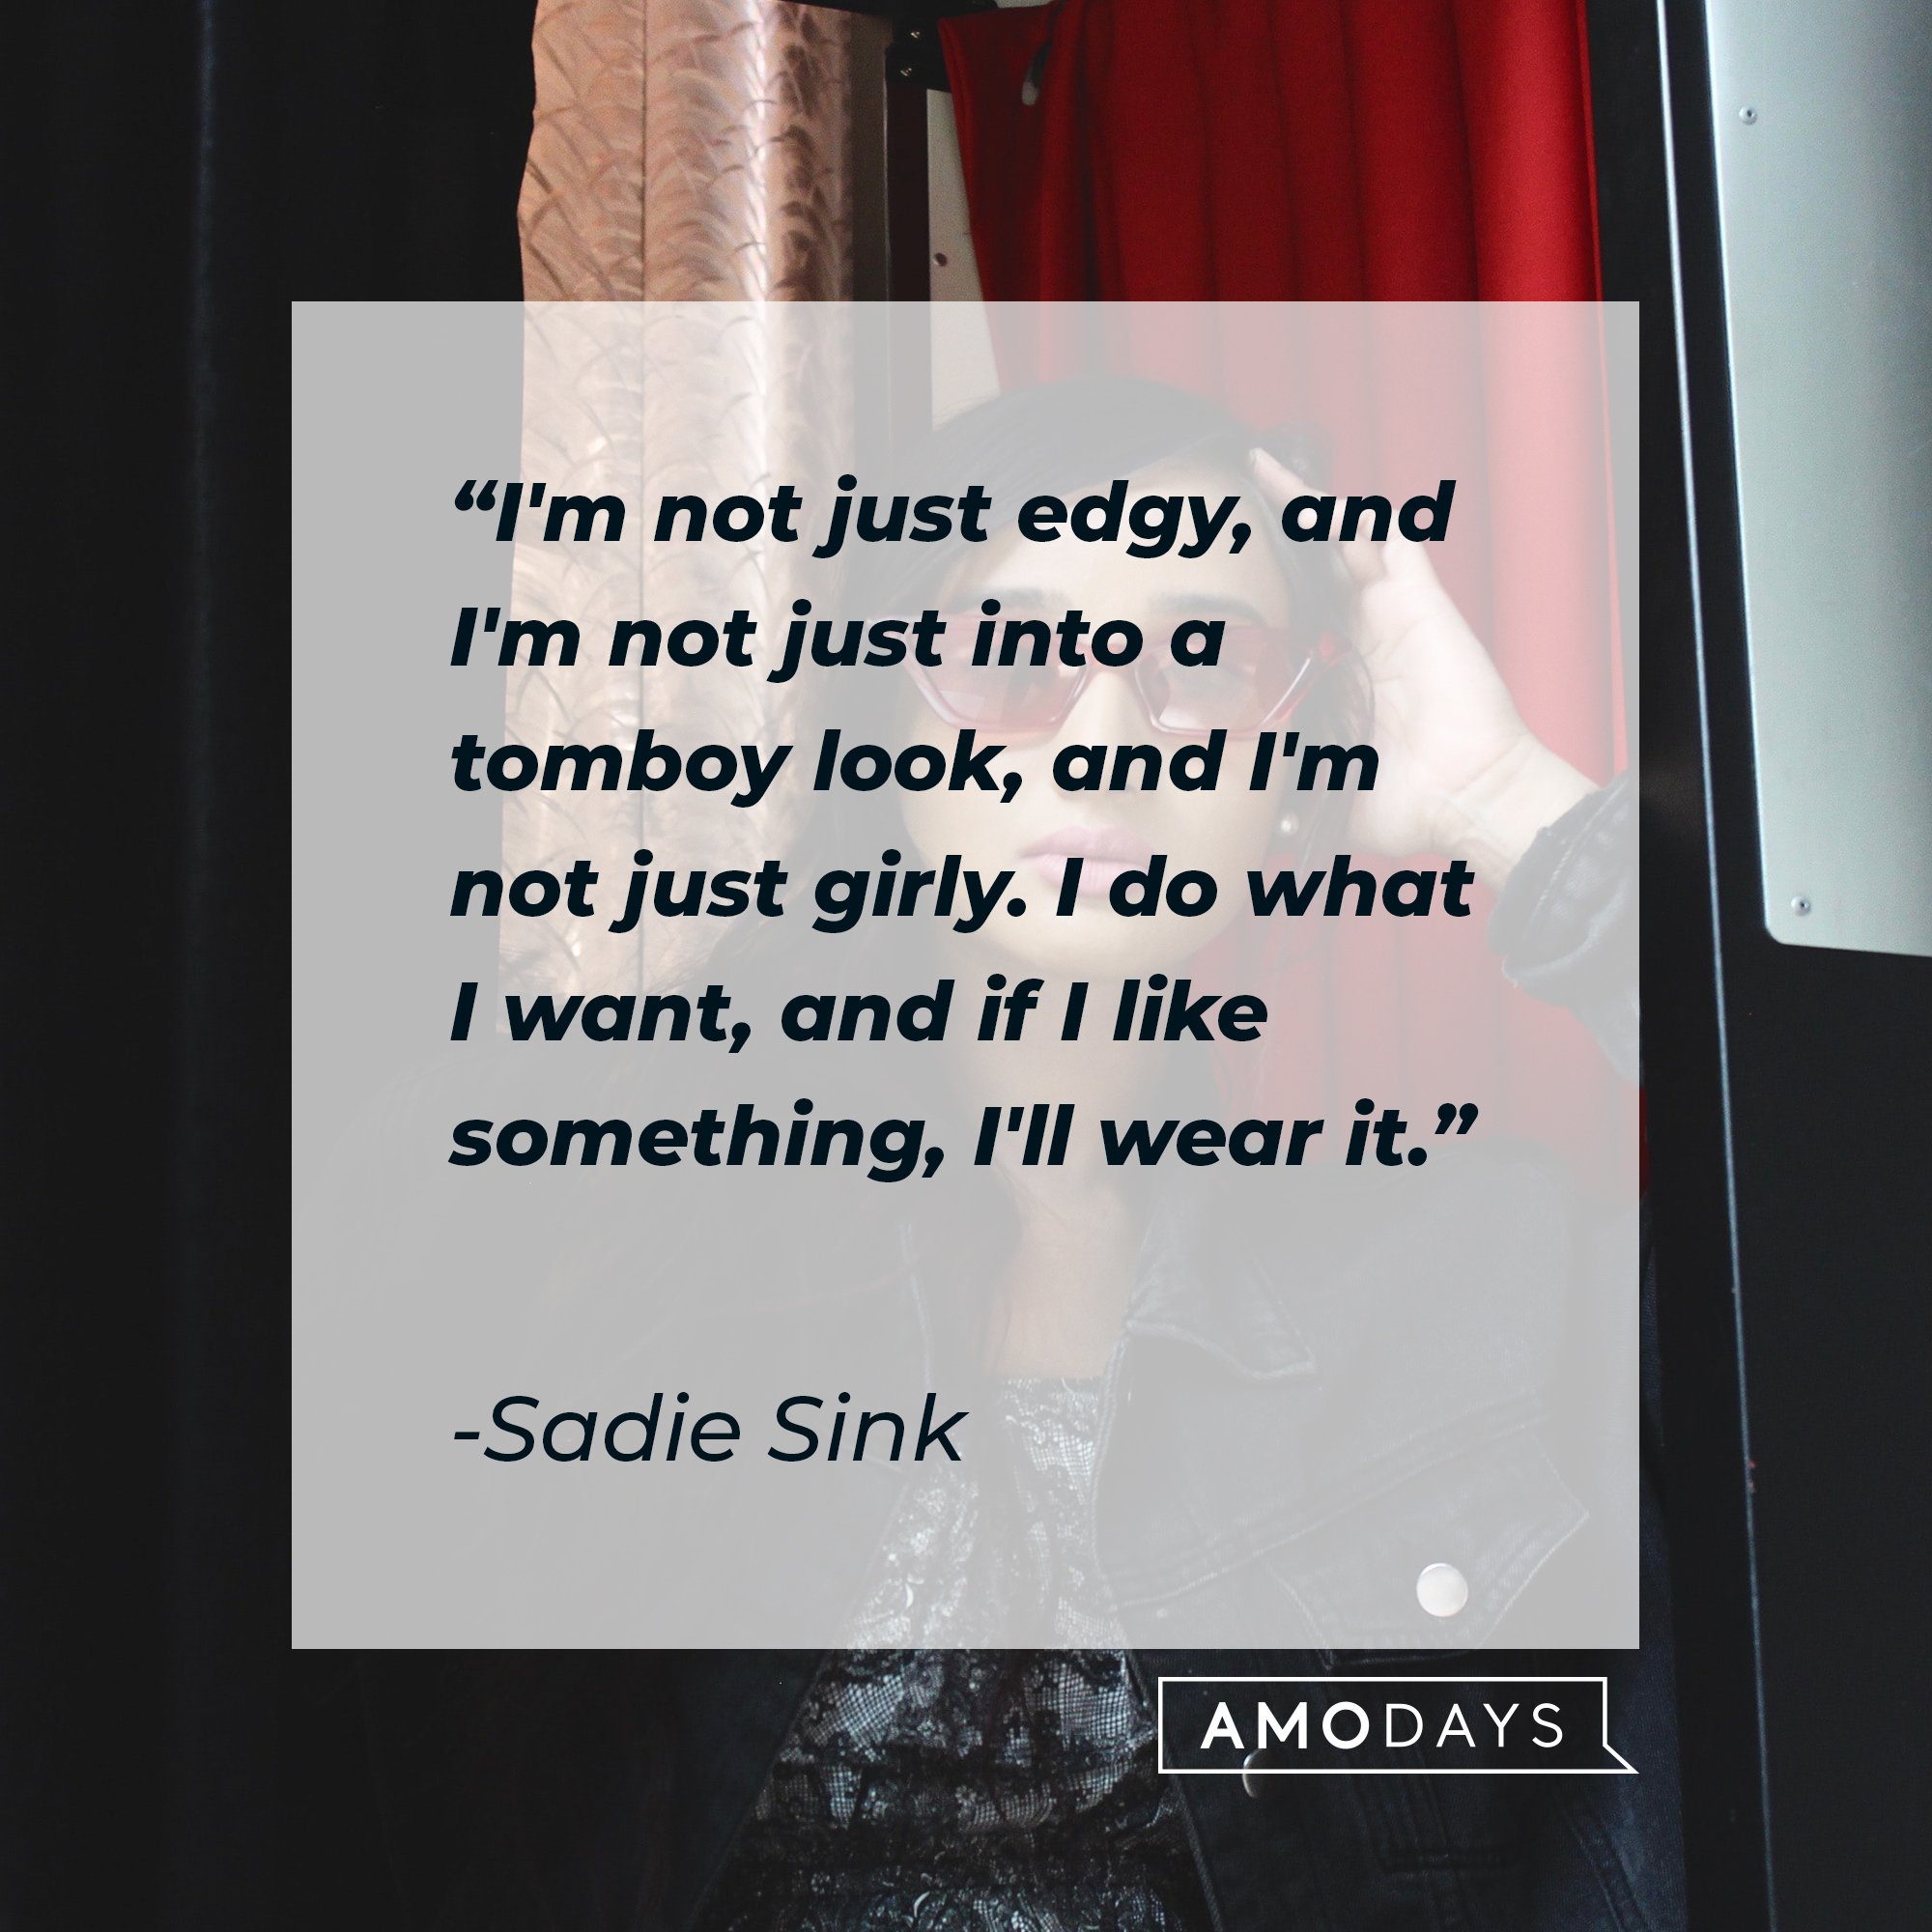 Sadie Sink’s quote: "I'm not just edgy, and I'm not just into a tomboy look, and I'm not just girly. I do what I want, and if I like something, I'll wear it." | Image: AmoDays